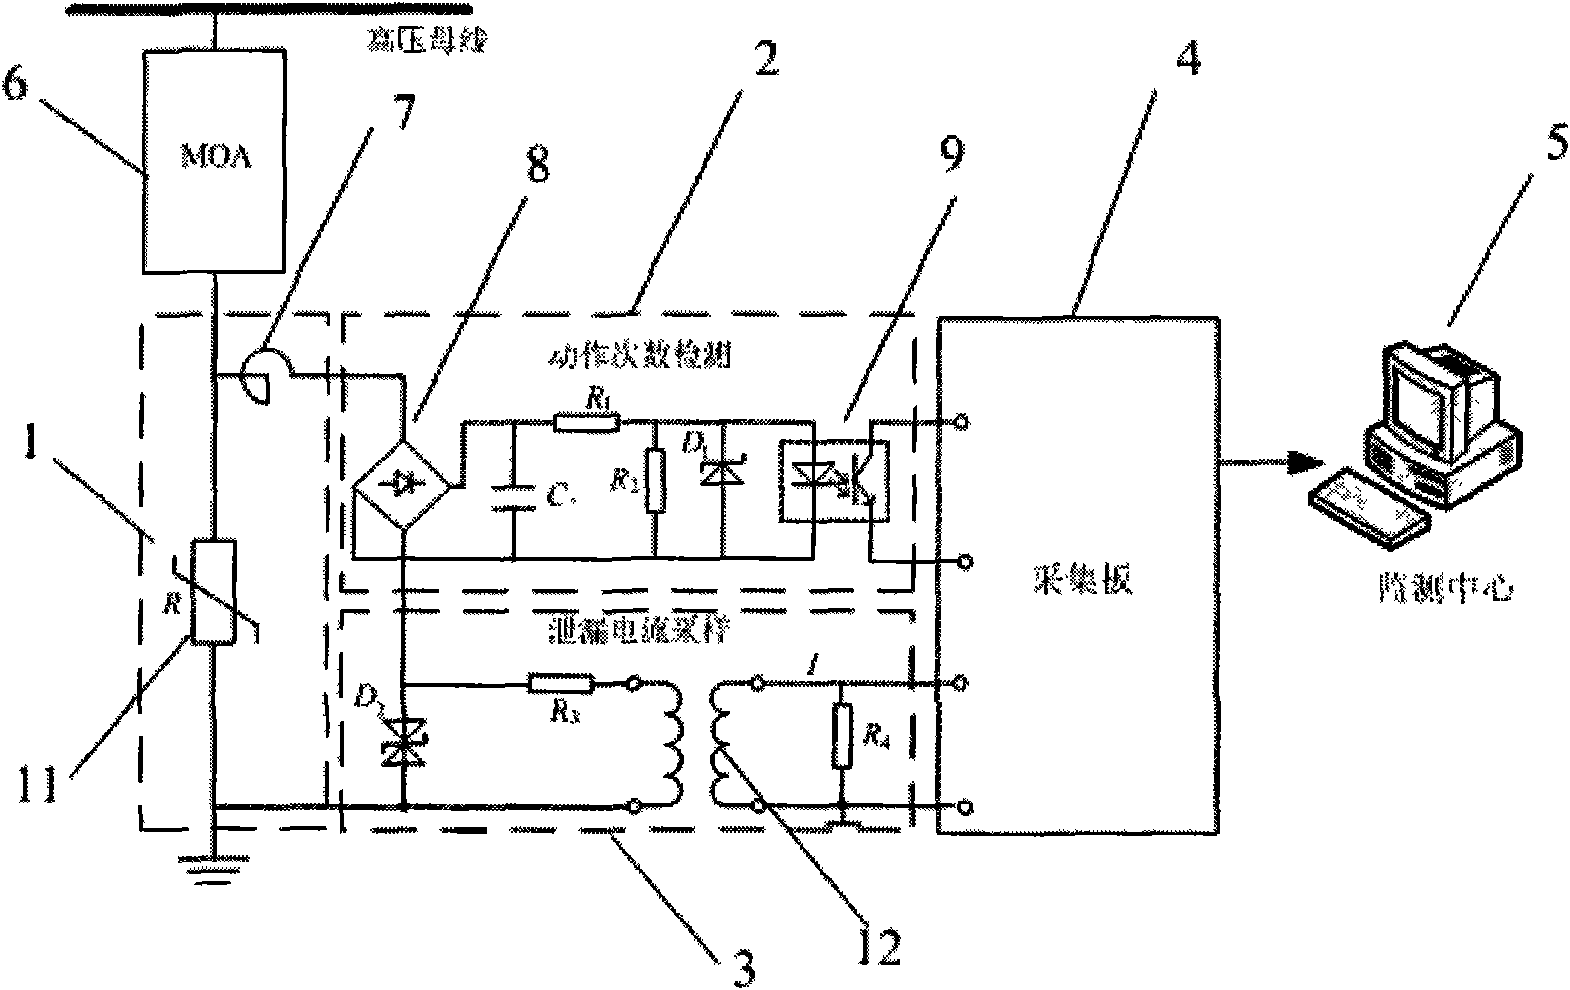 On-line monitoring device of metallic oxide arrester